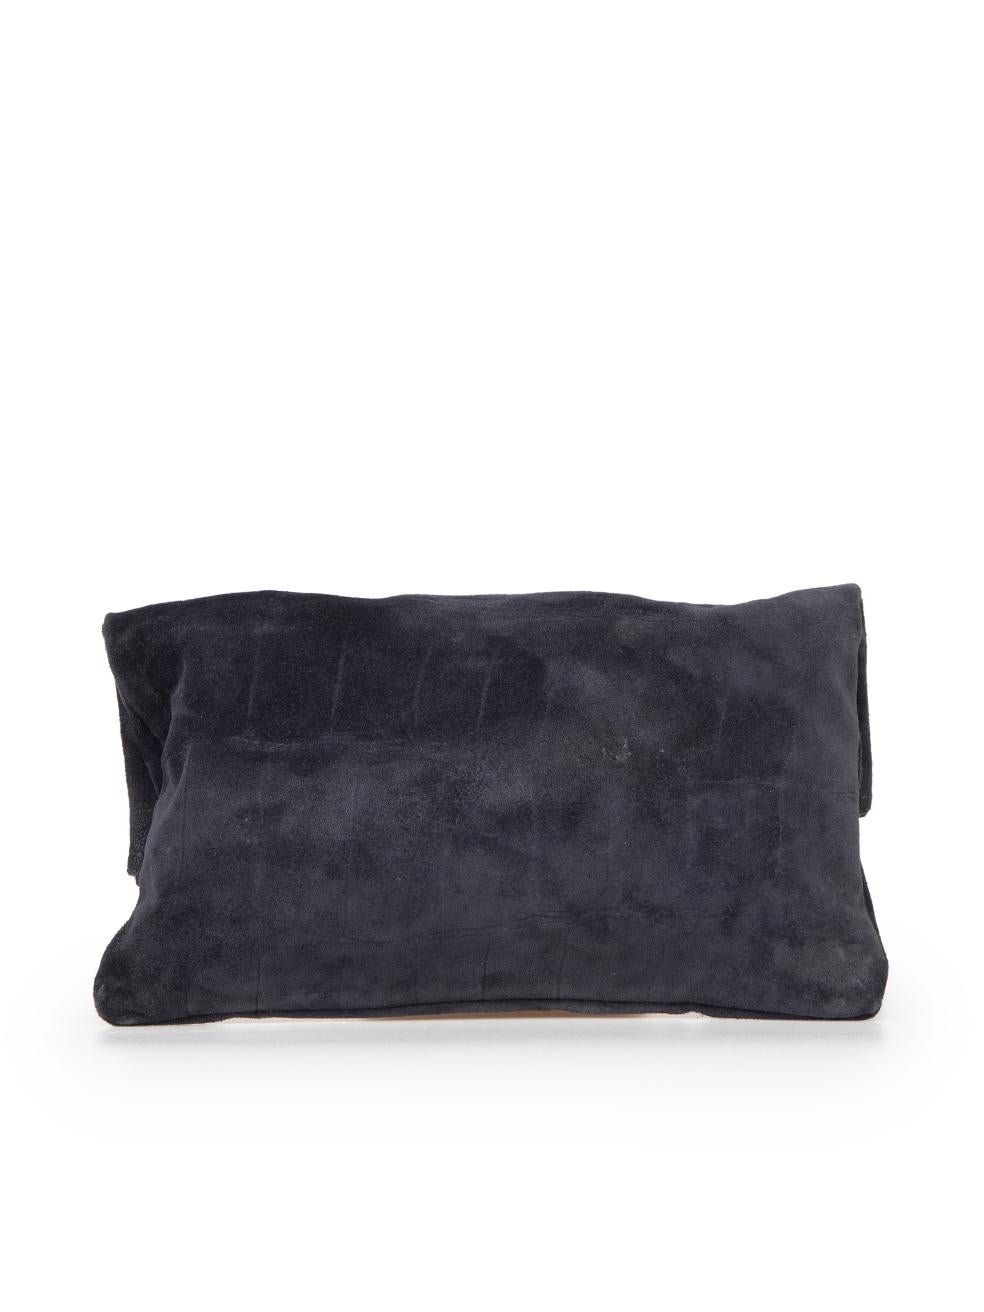 Mulberry Navy Suede Daria Croc Embossed Clutch In Excellent Condition In London, GB